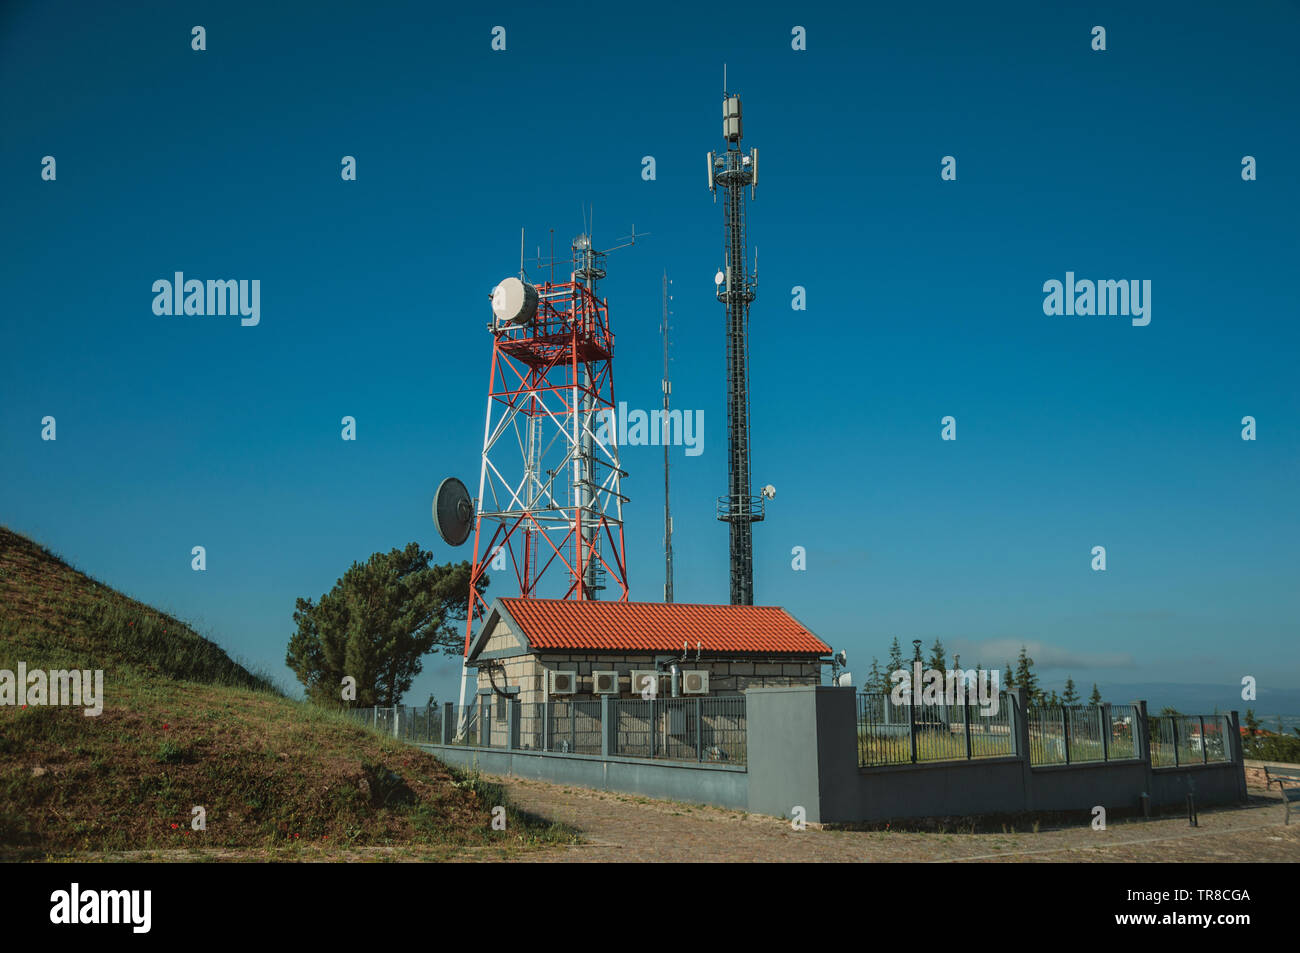 Telecommunication towers with antennas on a base transceiver station at Guarda. A well-kept medieval town in the eastern Portugal. Stock Photo